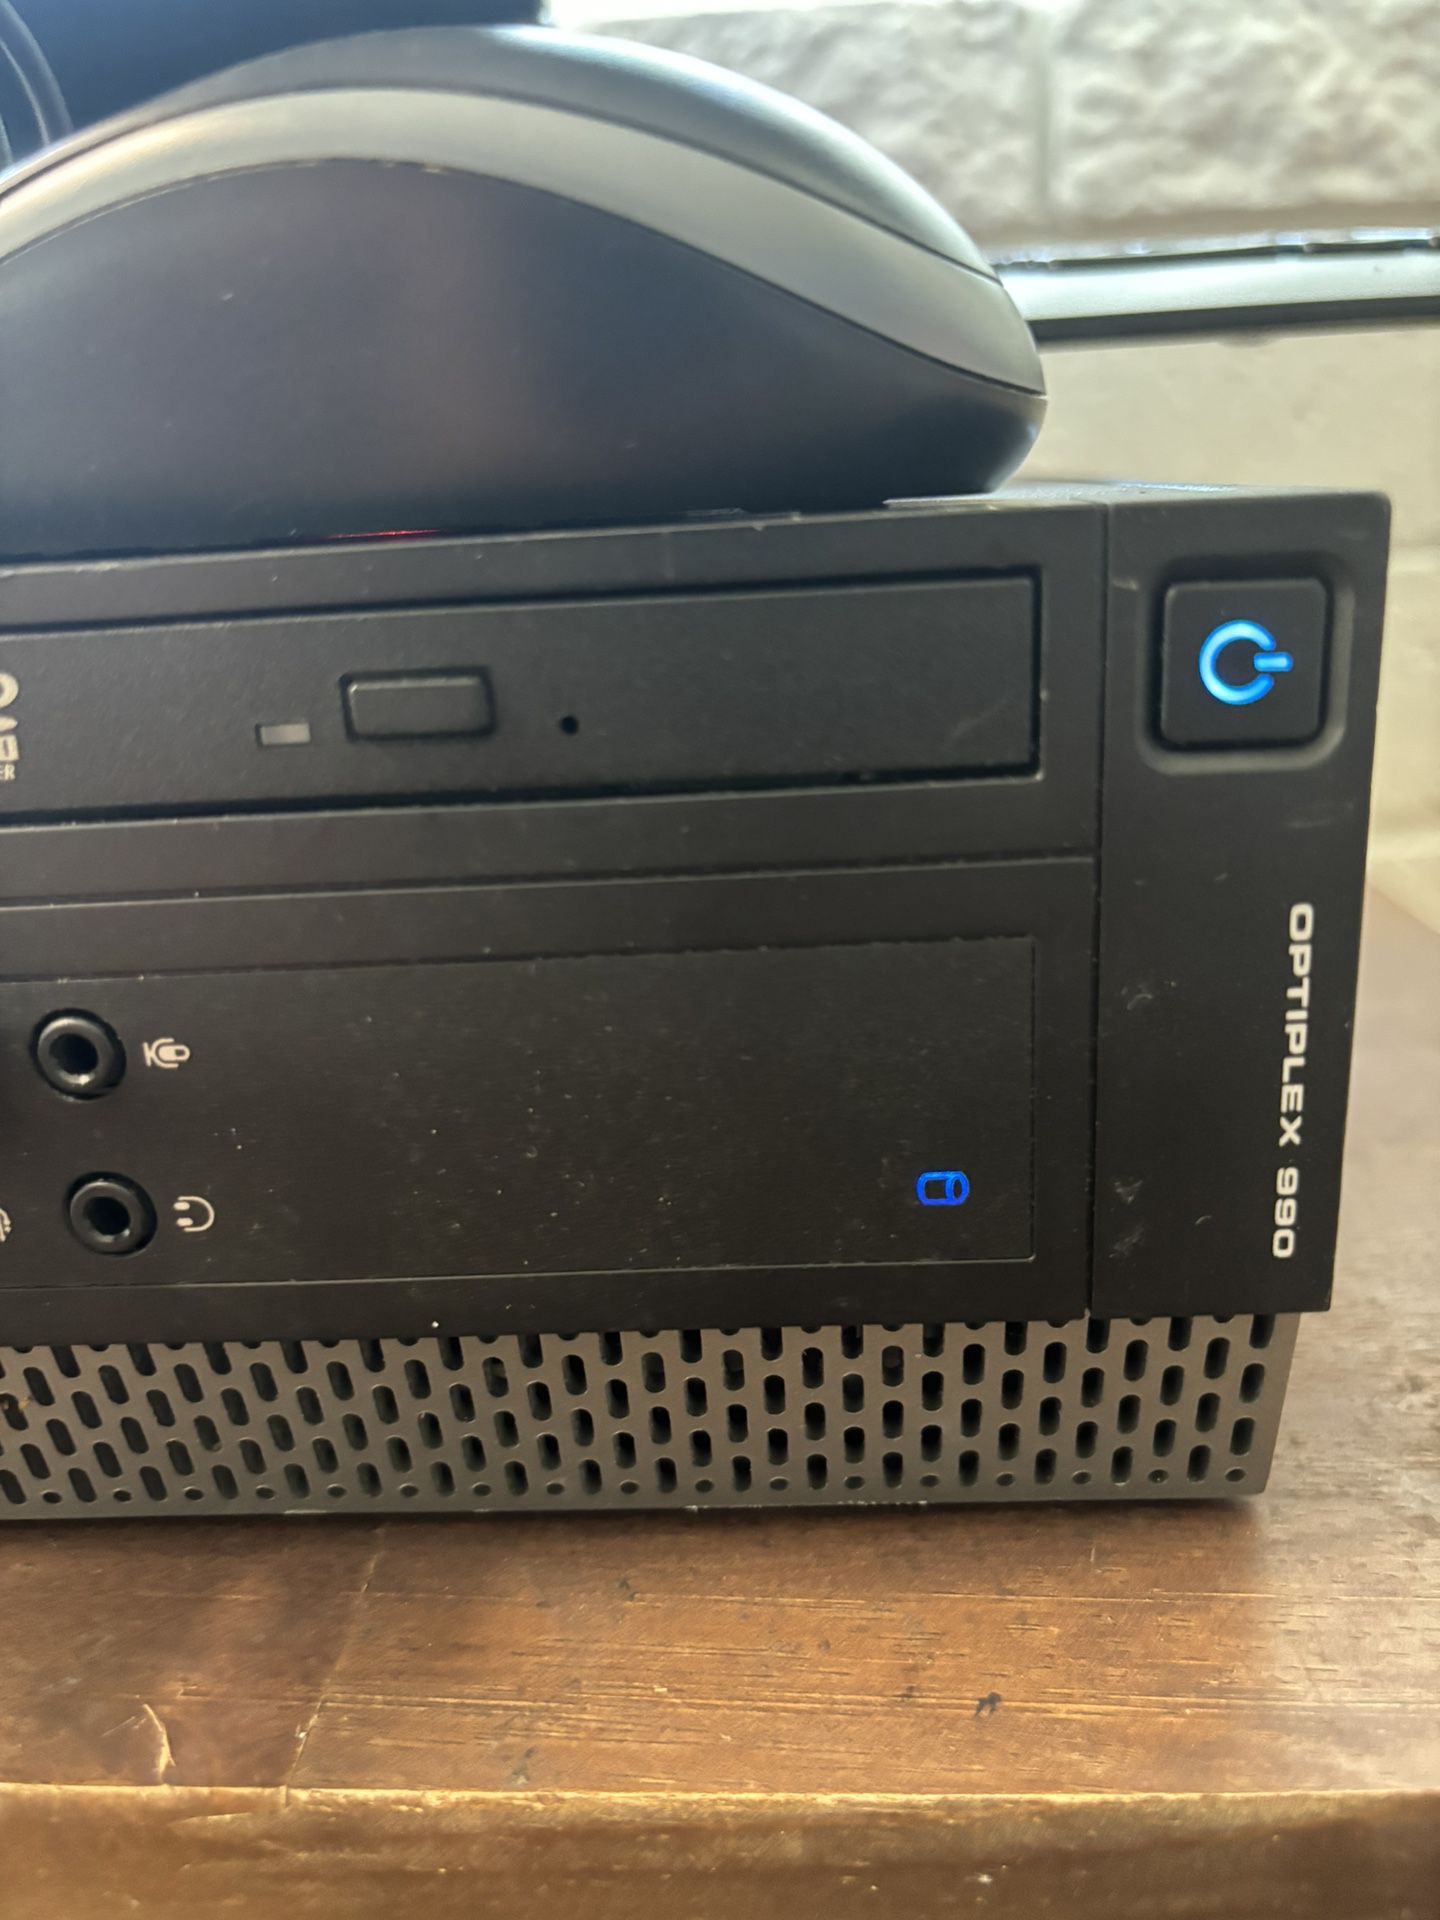 Dell optiplex 990 core i5 with Monitor 23”, mouse, keybord and headphone